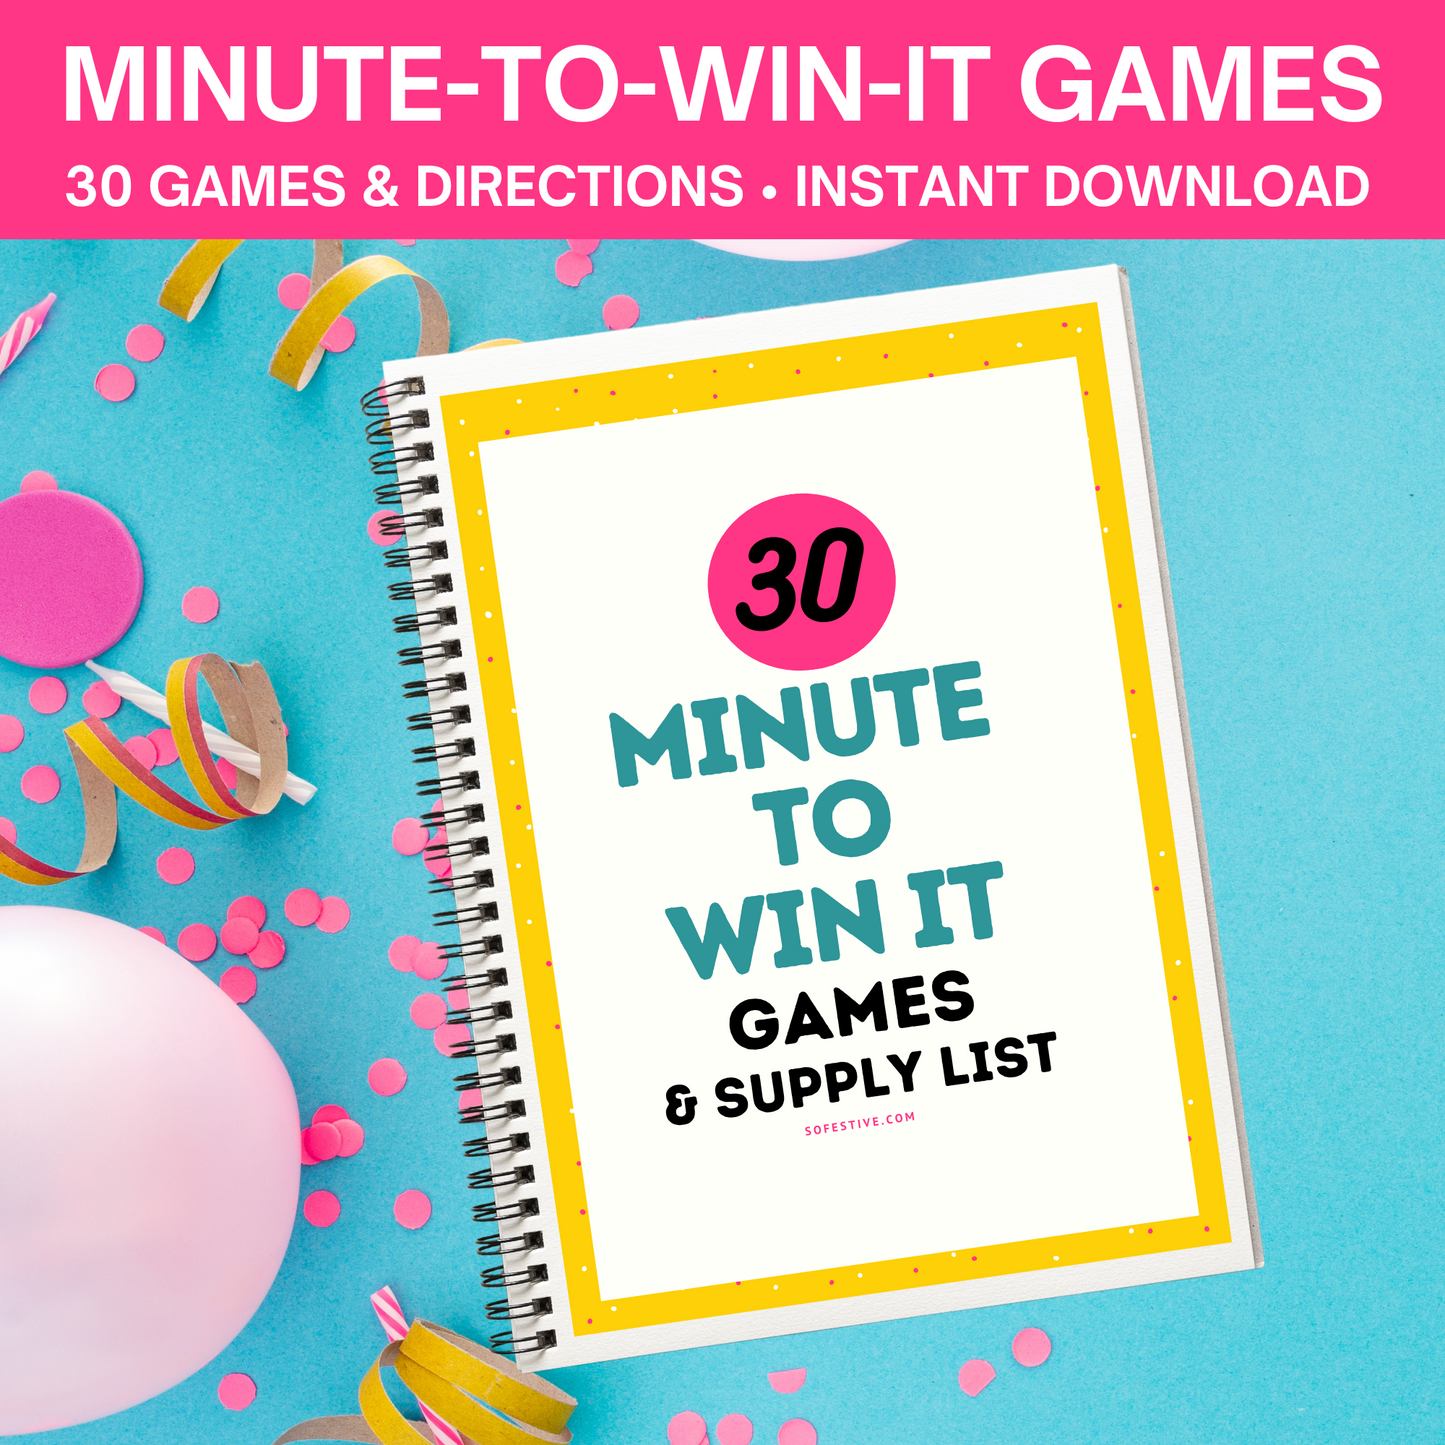 30 Minute To Win It Games PDF (Instructions & Supply List Included!)